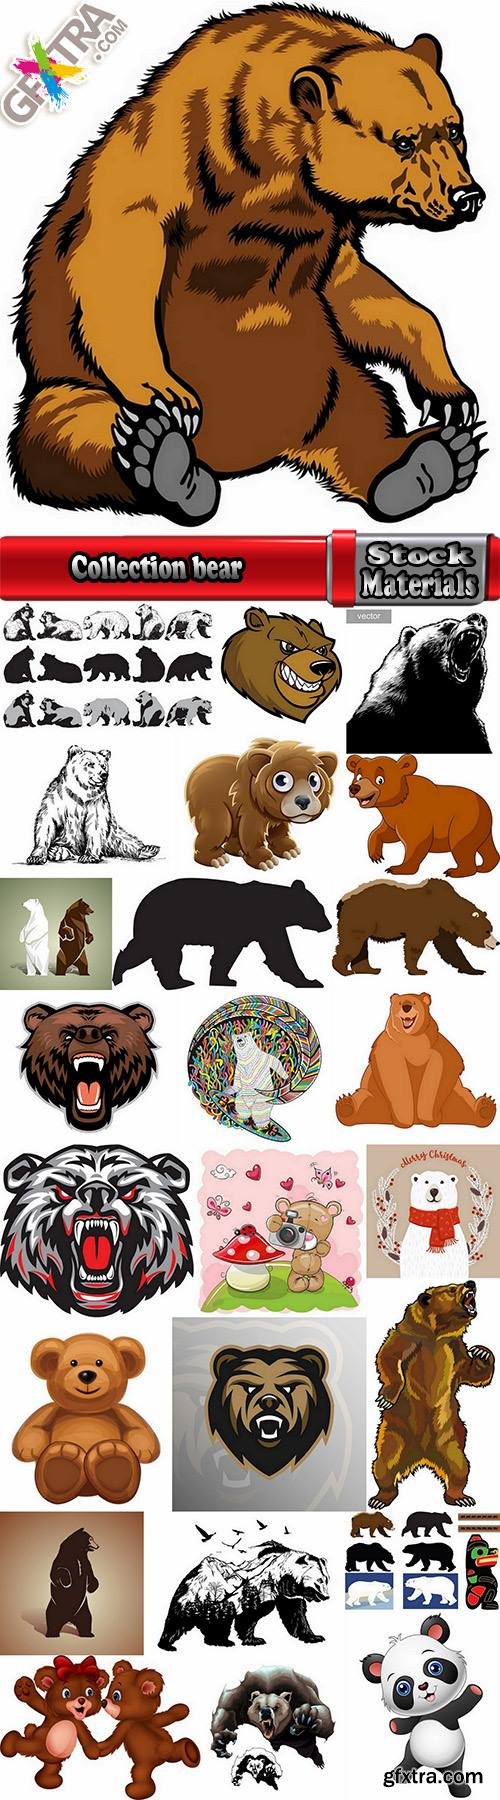 Collection polar bear brown grizzly teddy icon for children book illustration 25 EPS